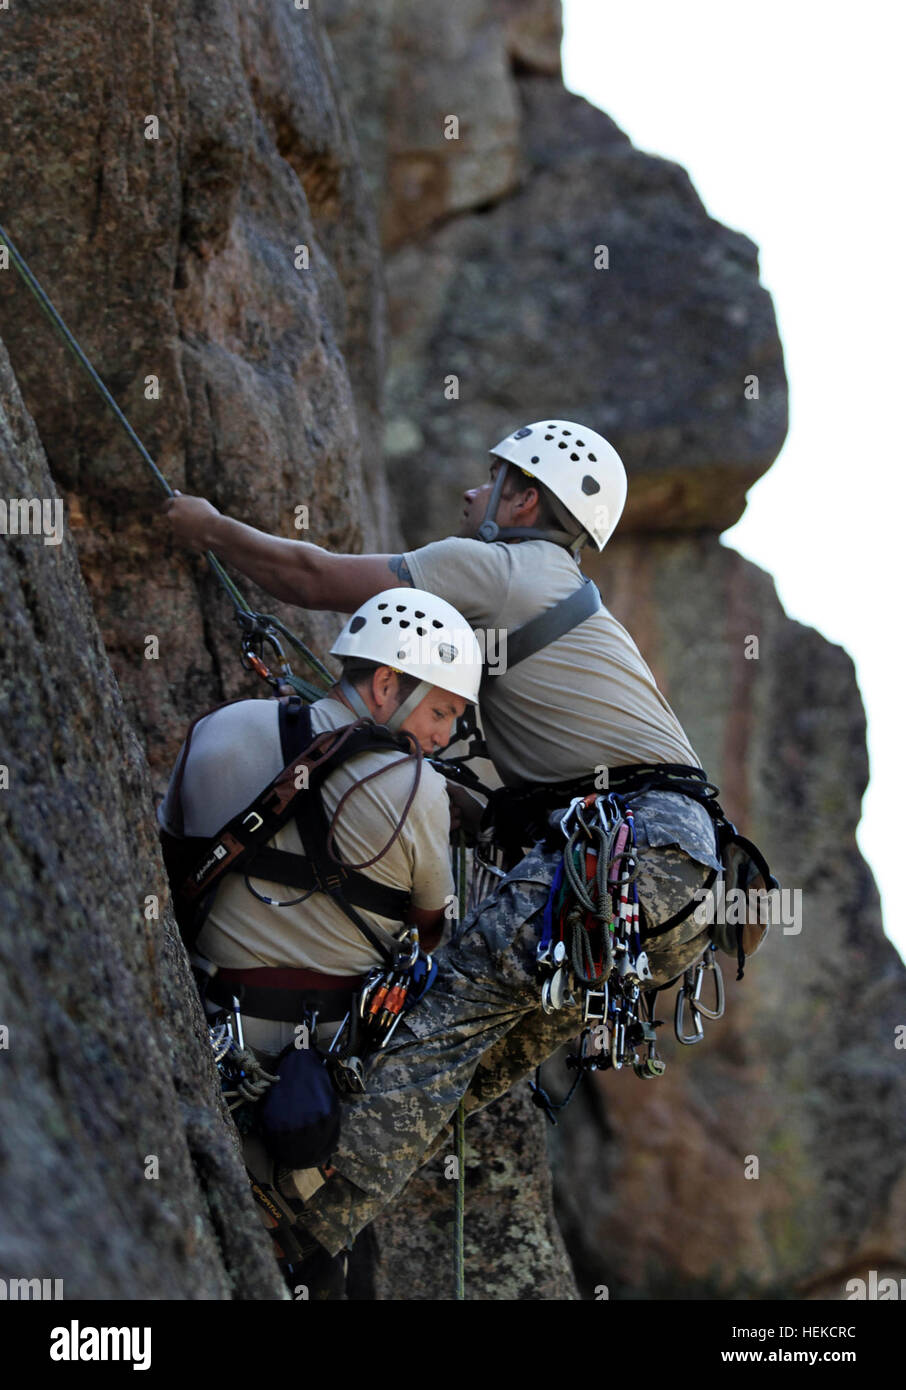 Soldiers attending the U.S. Army Special Forces Command (A) Mountaineering Program conduct Senior Course Level II  training near Fort Carson, Colo., after completing the Basic Course (Level III) where team members learned 15 basic tasks, including navigating in mountainous terrain, rope commands, transportation of a casualty on an improvised litter and rappelling techniques. During Level II, the soldiers are expected to know and pass a hands-on test on the basic fundamentals of rock climbing throughout the course. Among the 17 tasks in the Senior Course they must be proficient at constructing  Stock Photo